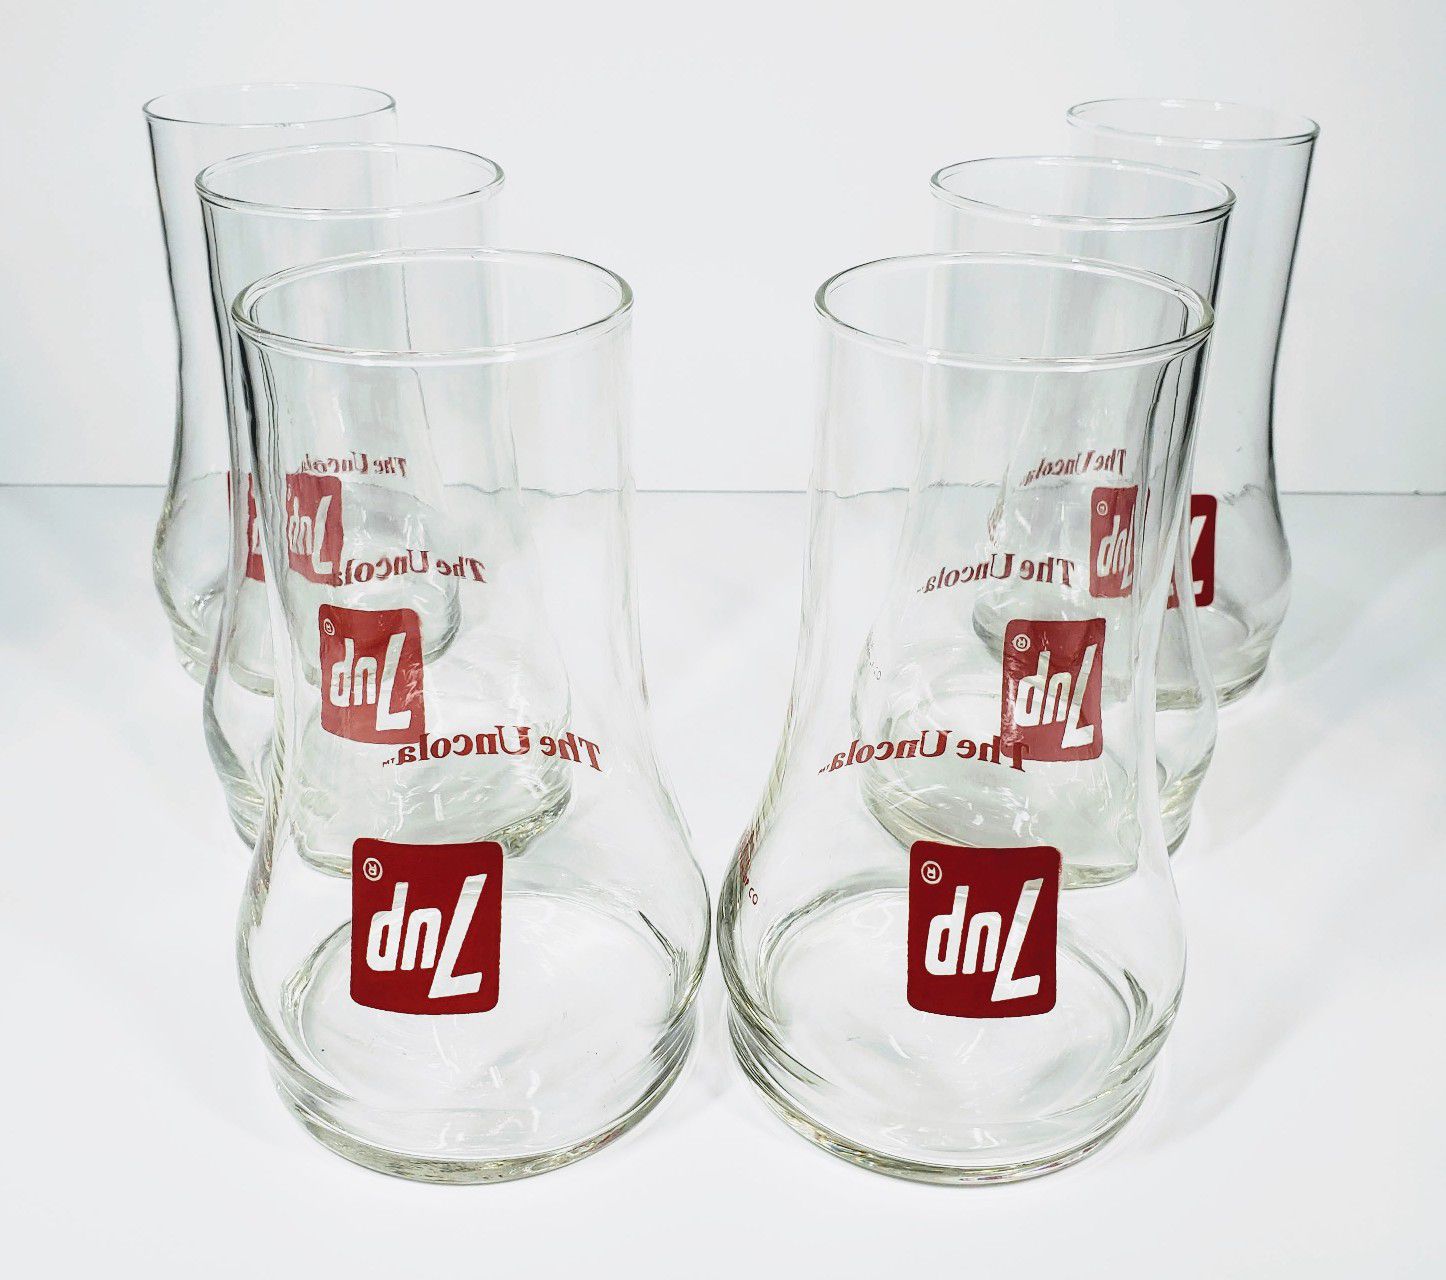 7up "The Uncola" Bell Shaped Glasses x6